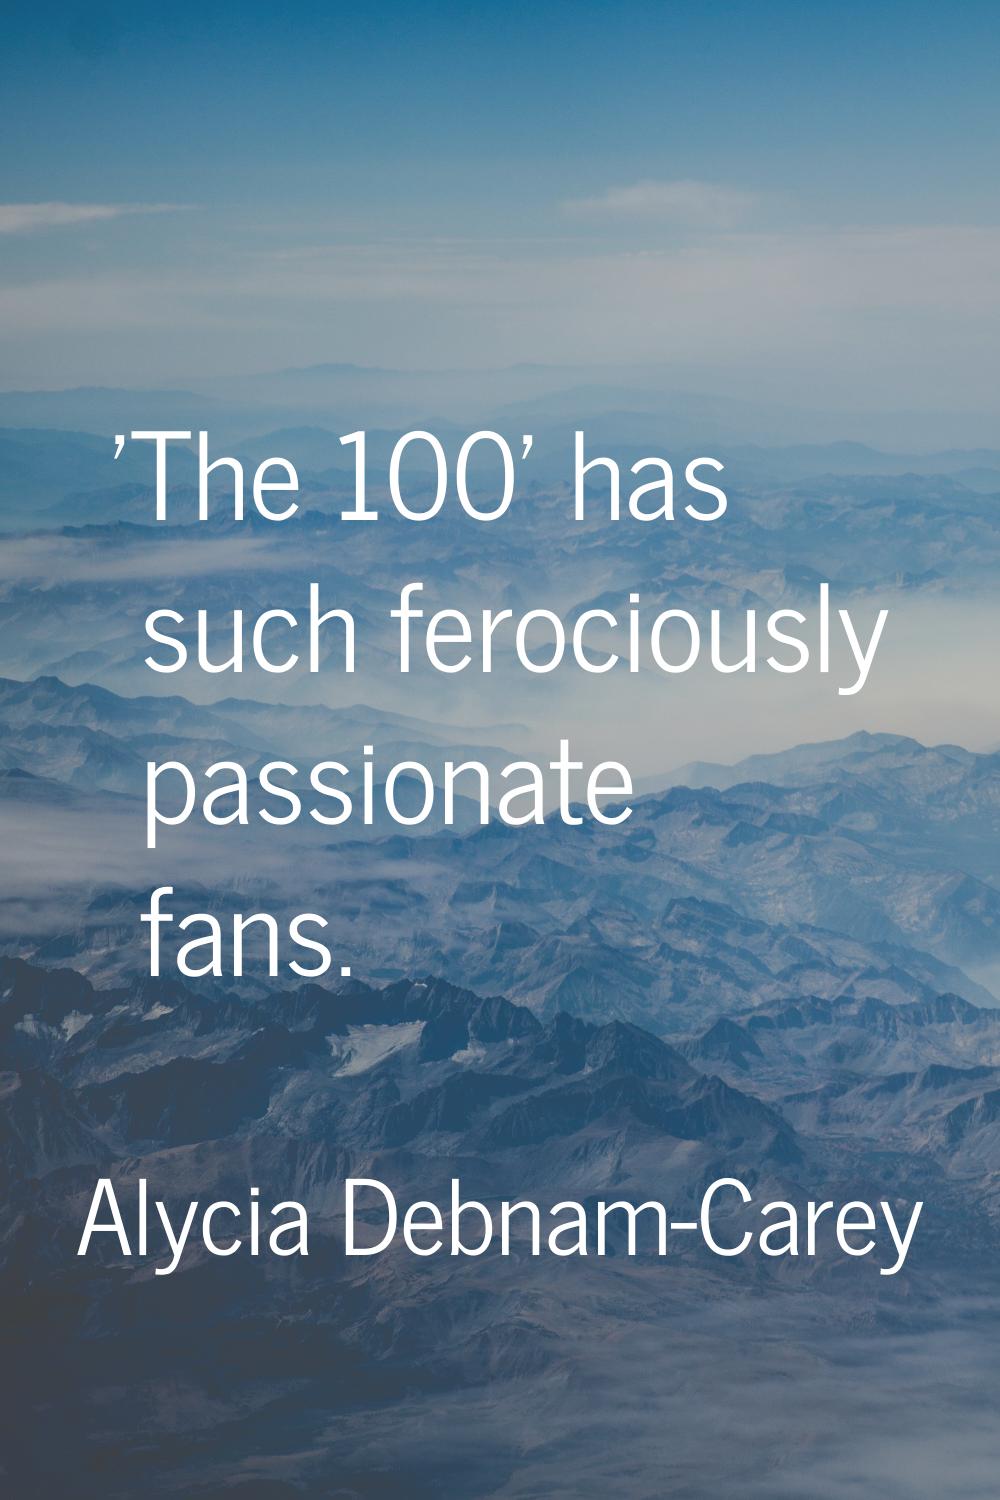 'The 100' has such ferociously passionate fans.